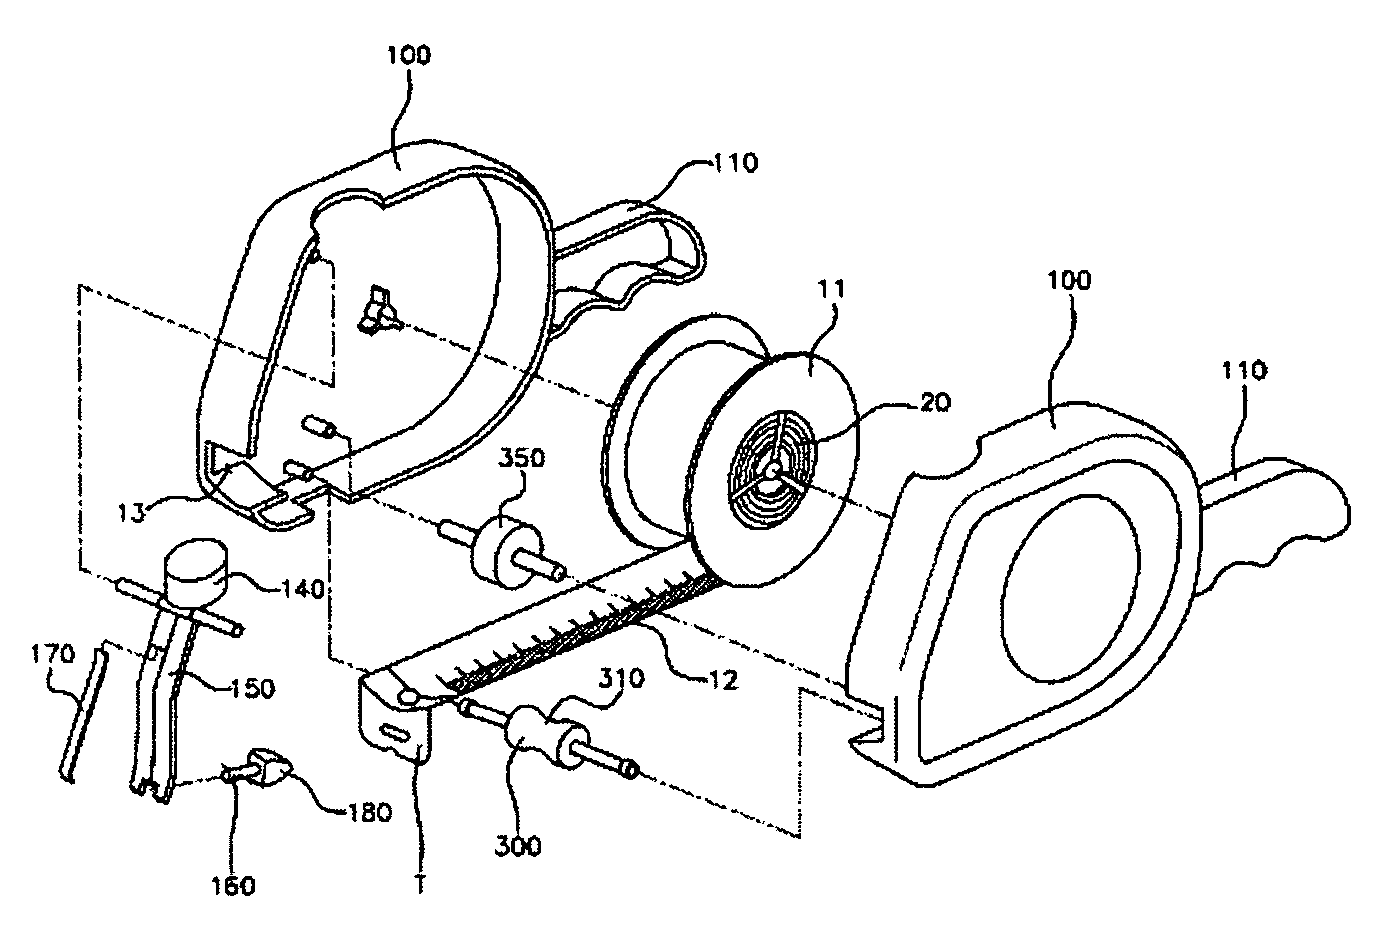 Tape measure with automatic blade extension mechanism